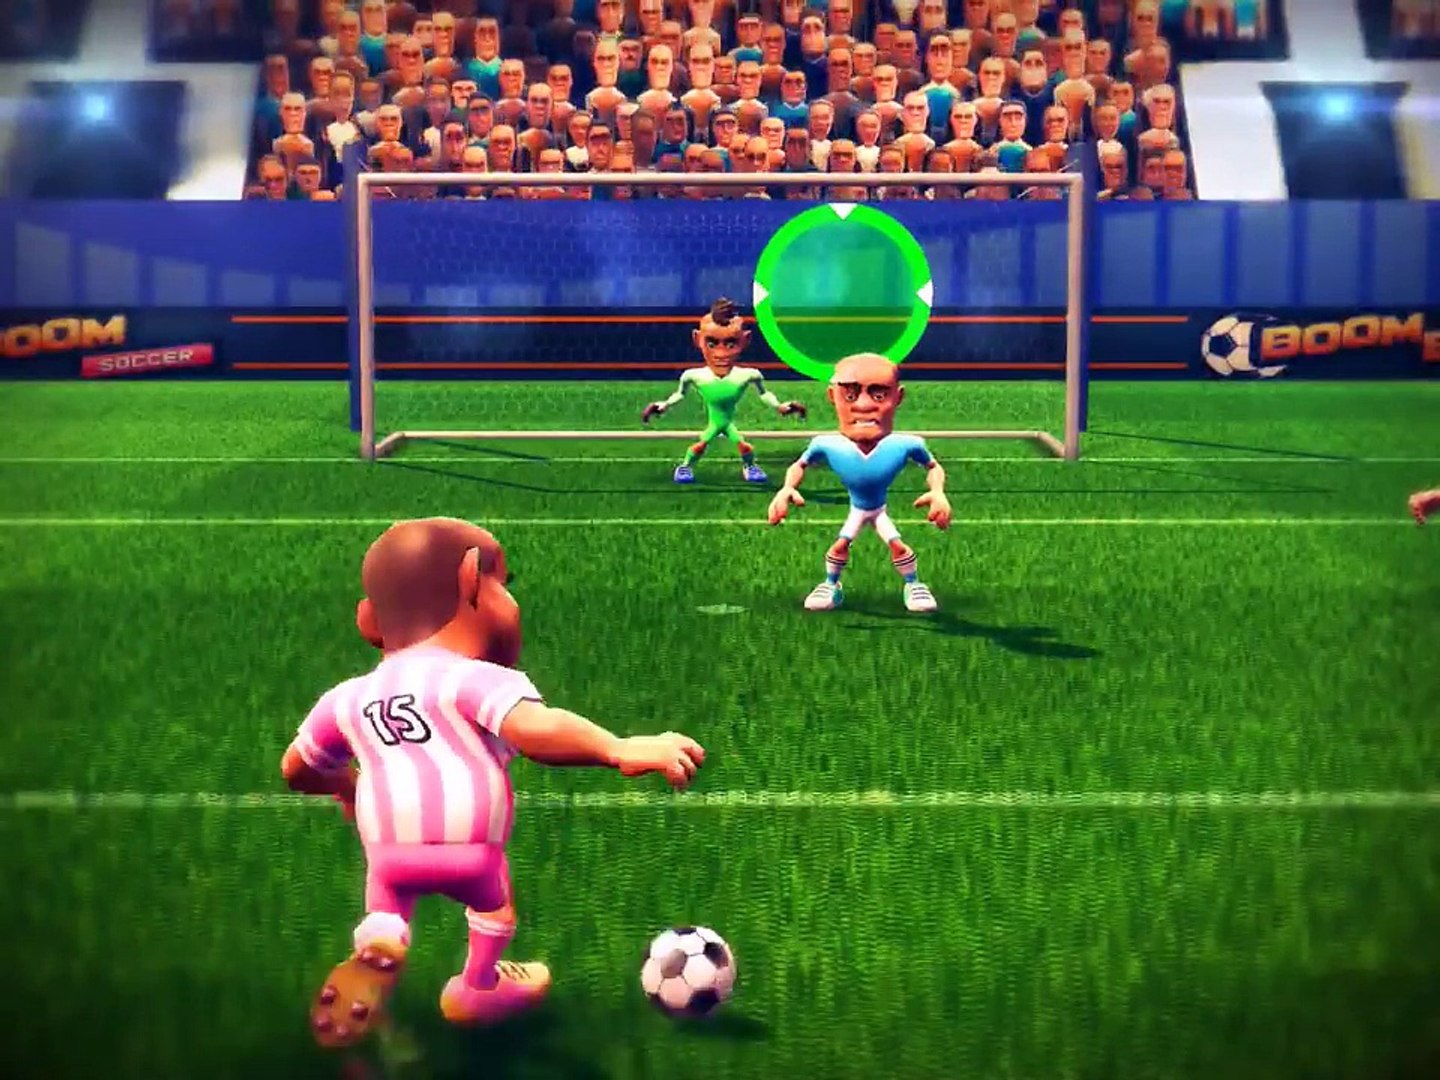 BOOM BOOM SOCCER Android / iOS Gameplay Video